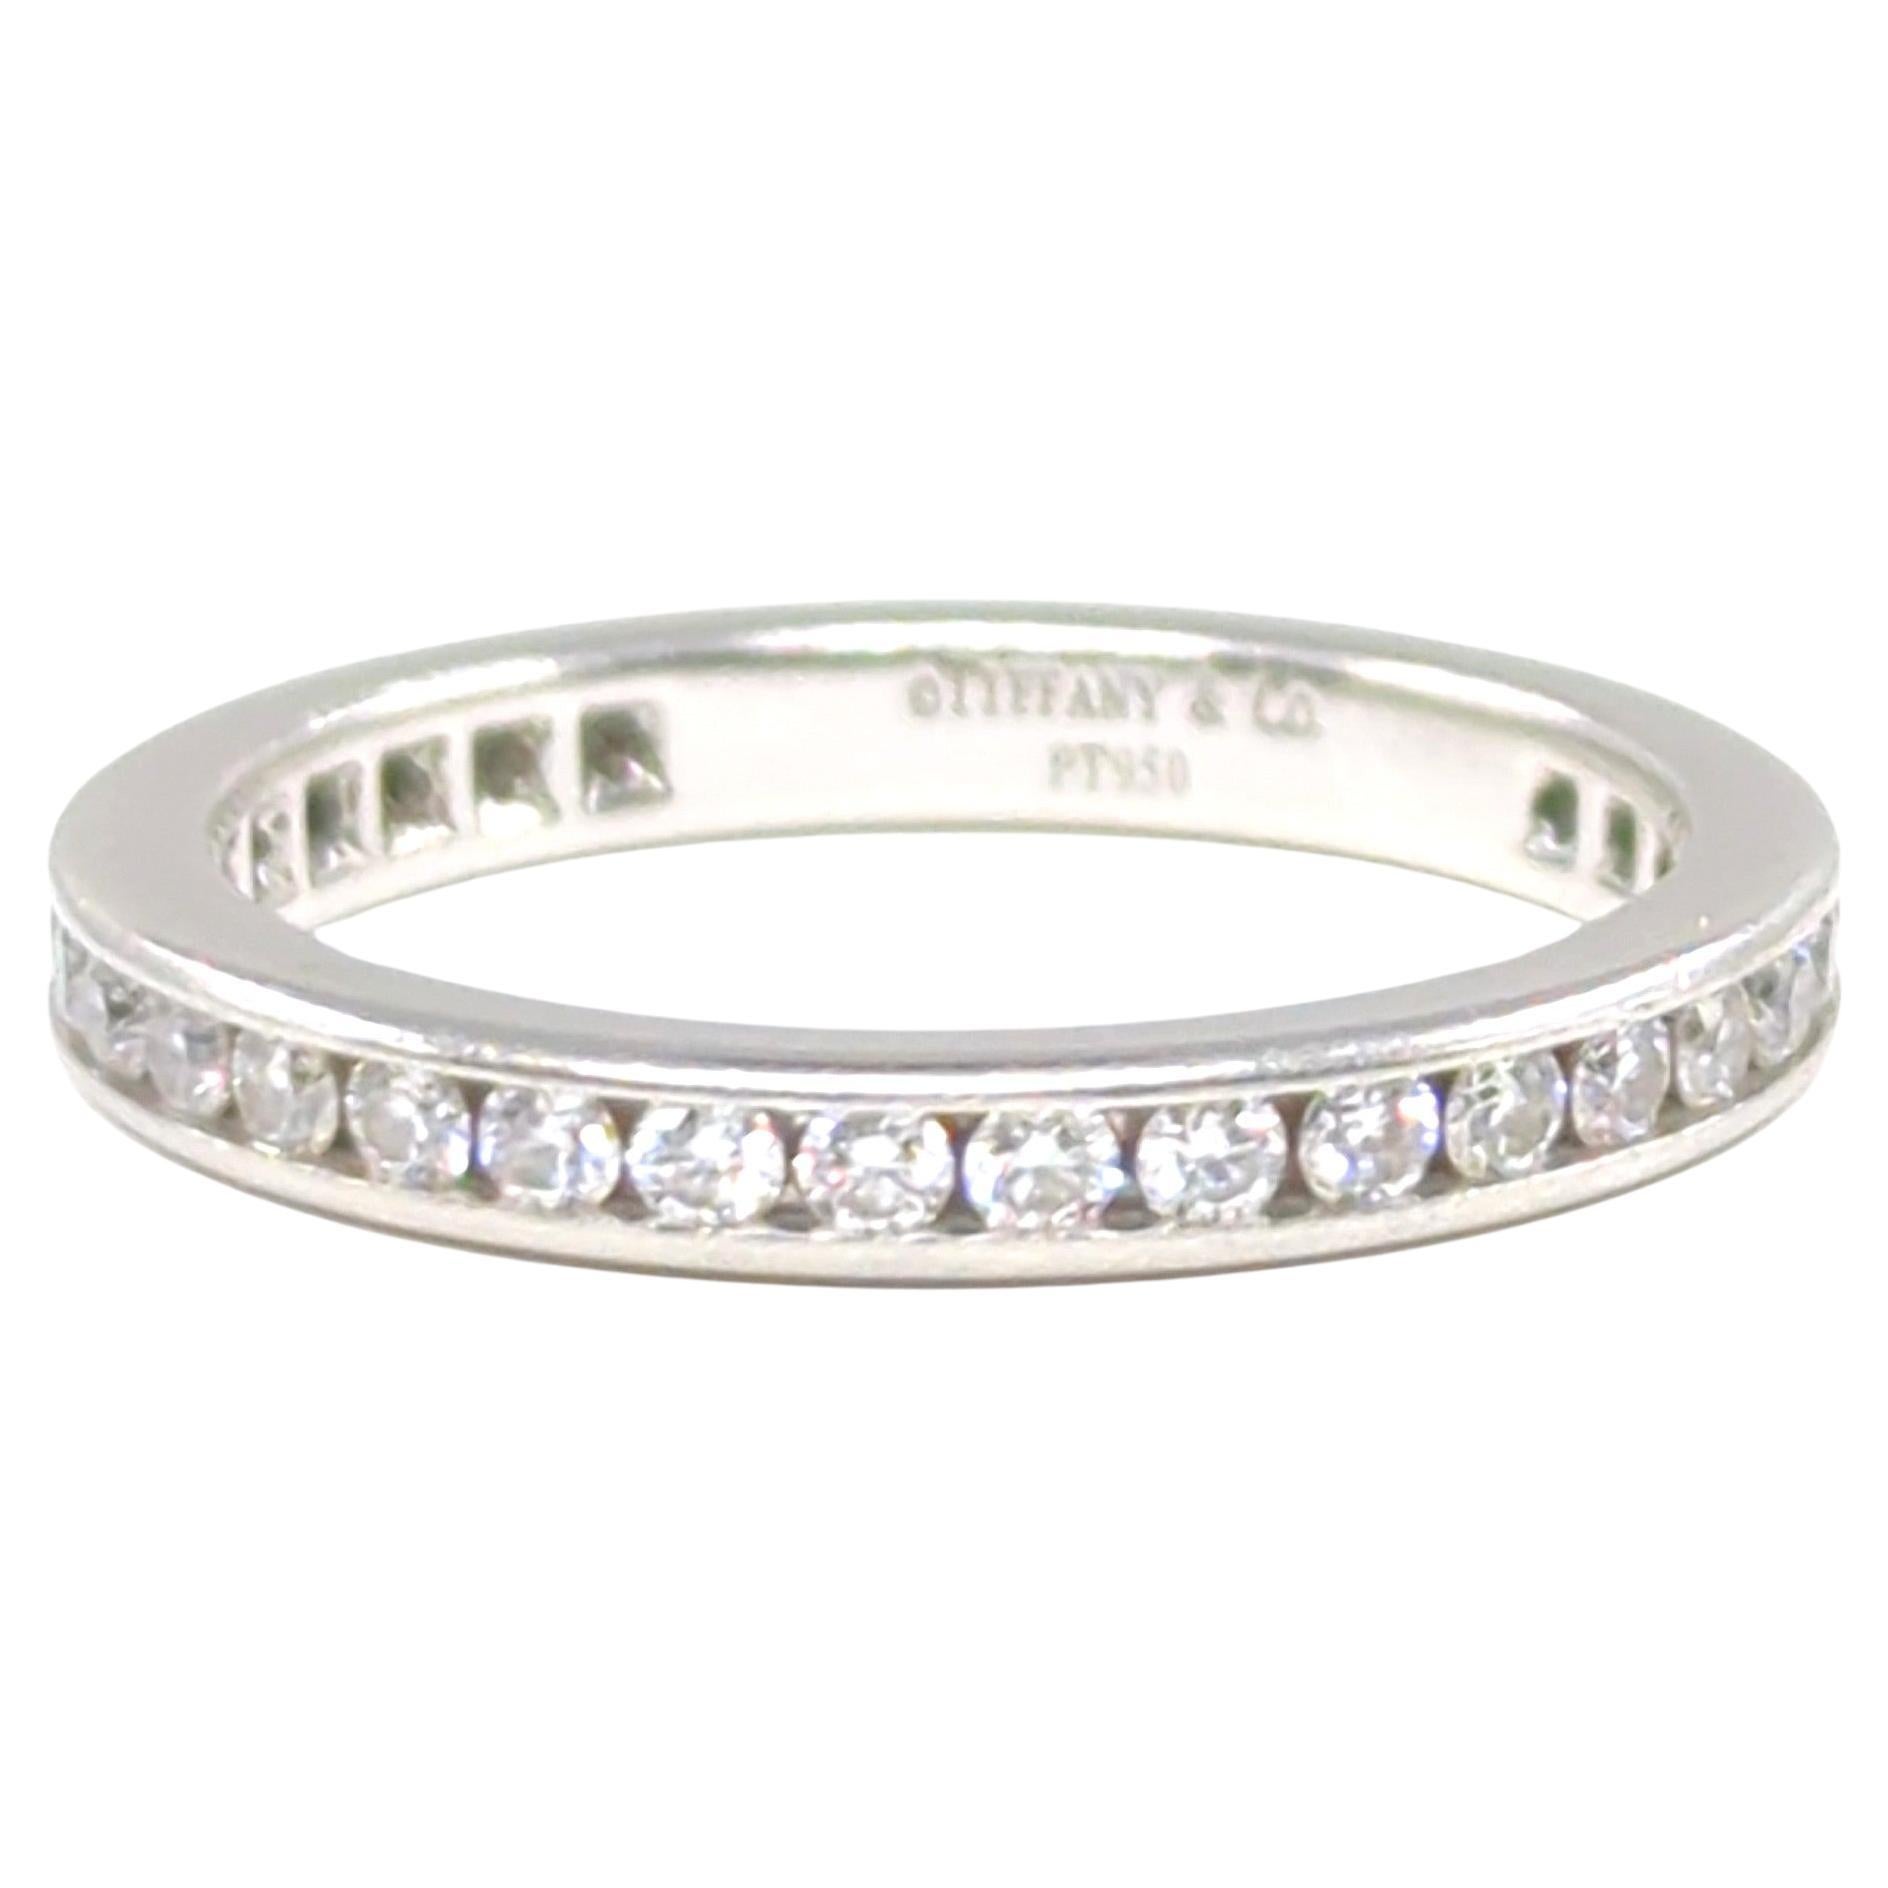 Tiffany & Co. Iconic Diamond Full Circle Eternity Band Ring 0.73 CTW Size 5.5 For Sale